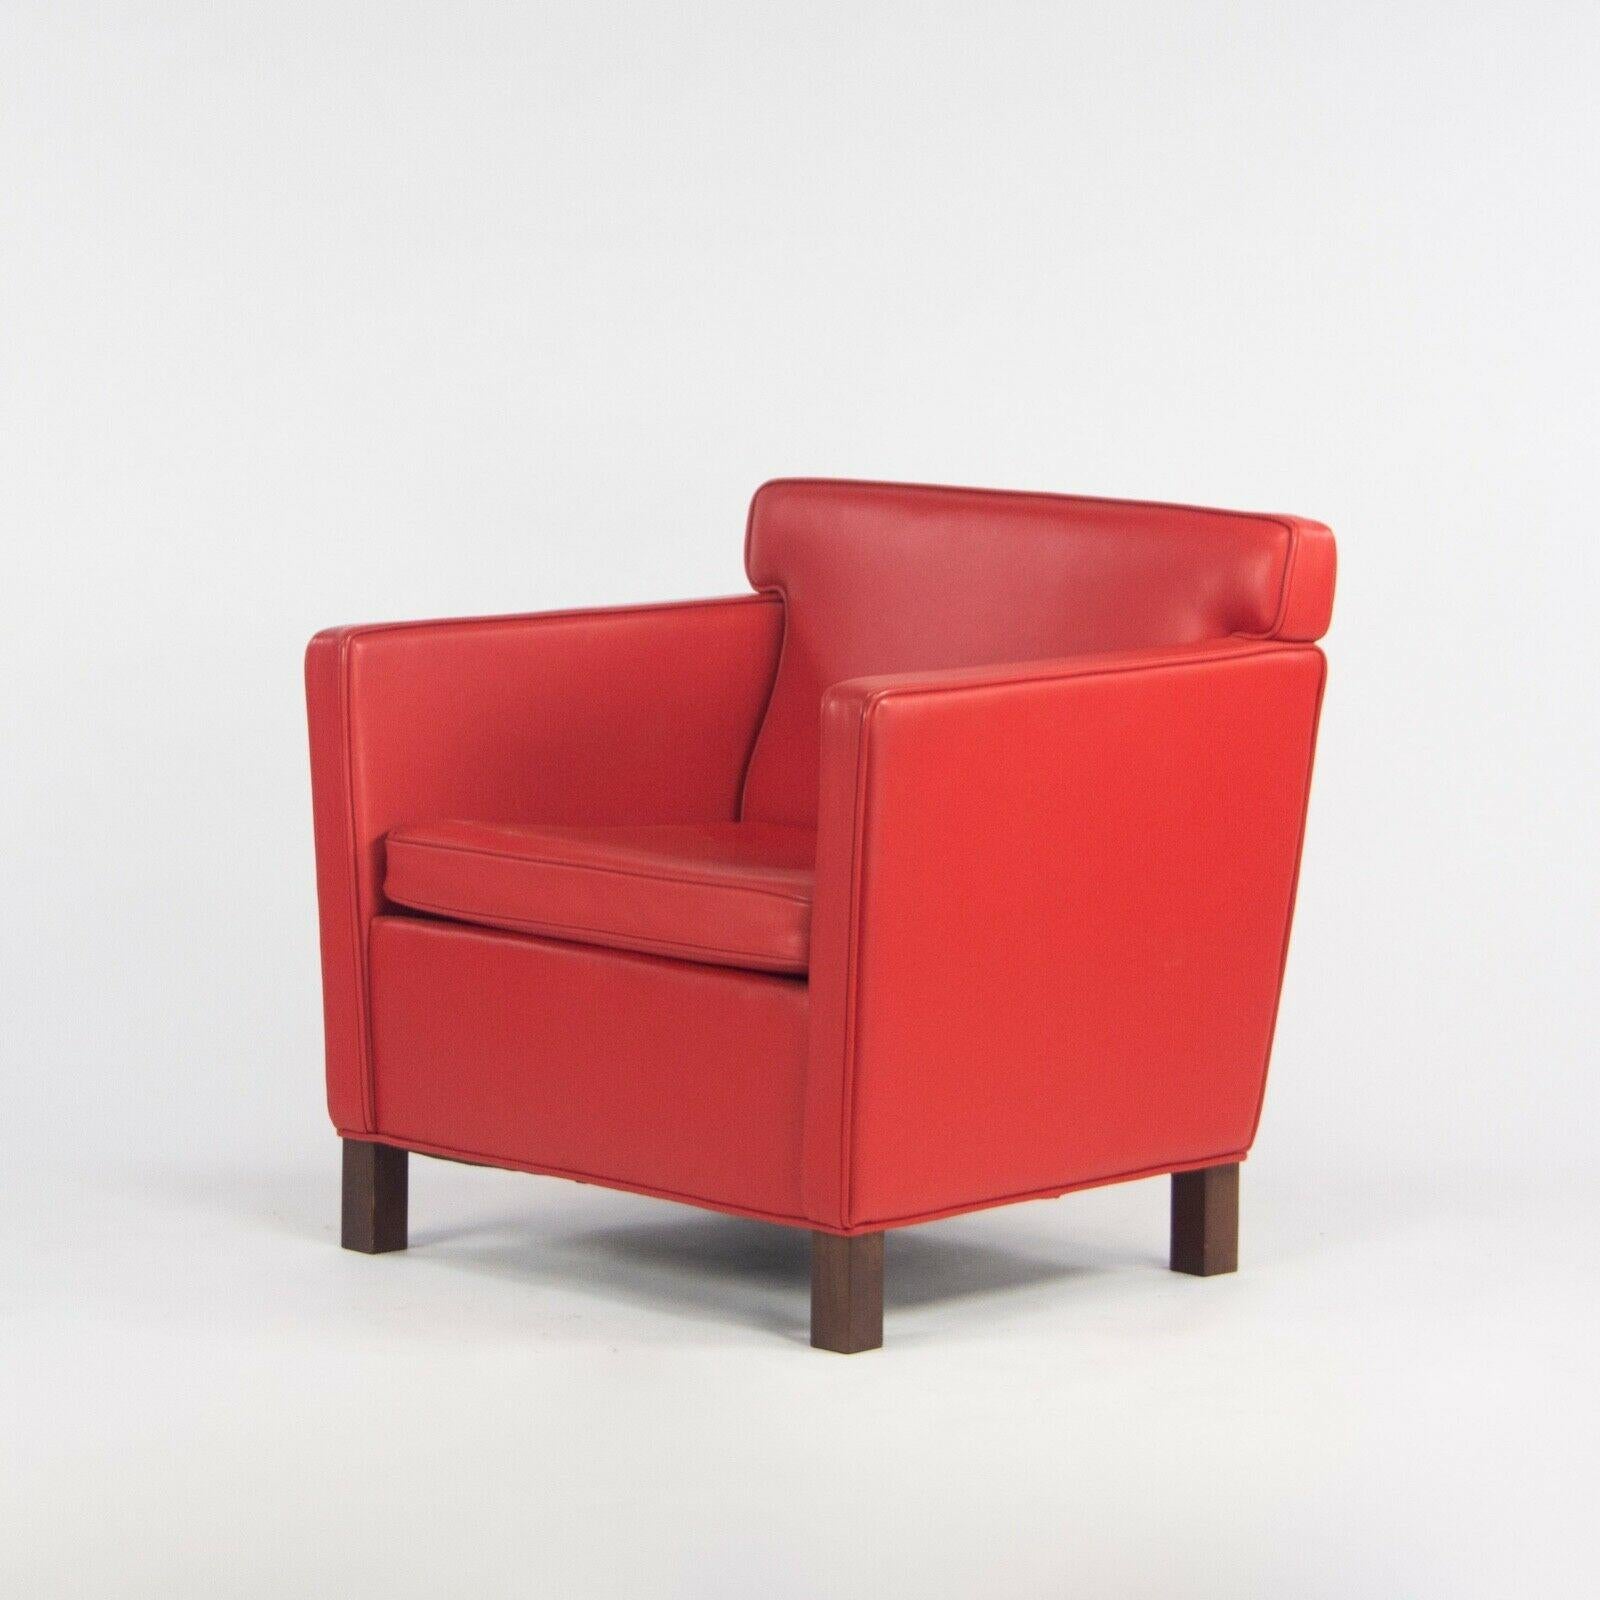 C. 2009 Pair of Mies Van Der Rohe Knoll Krefeld Lounge Chairs in Red Leather For Sale 3